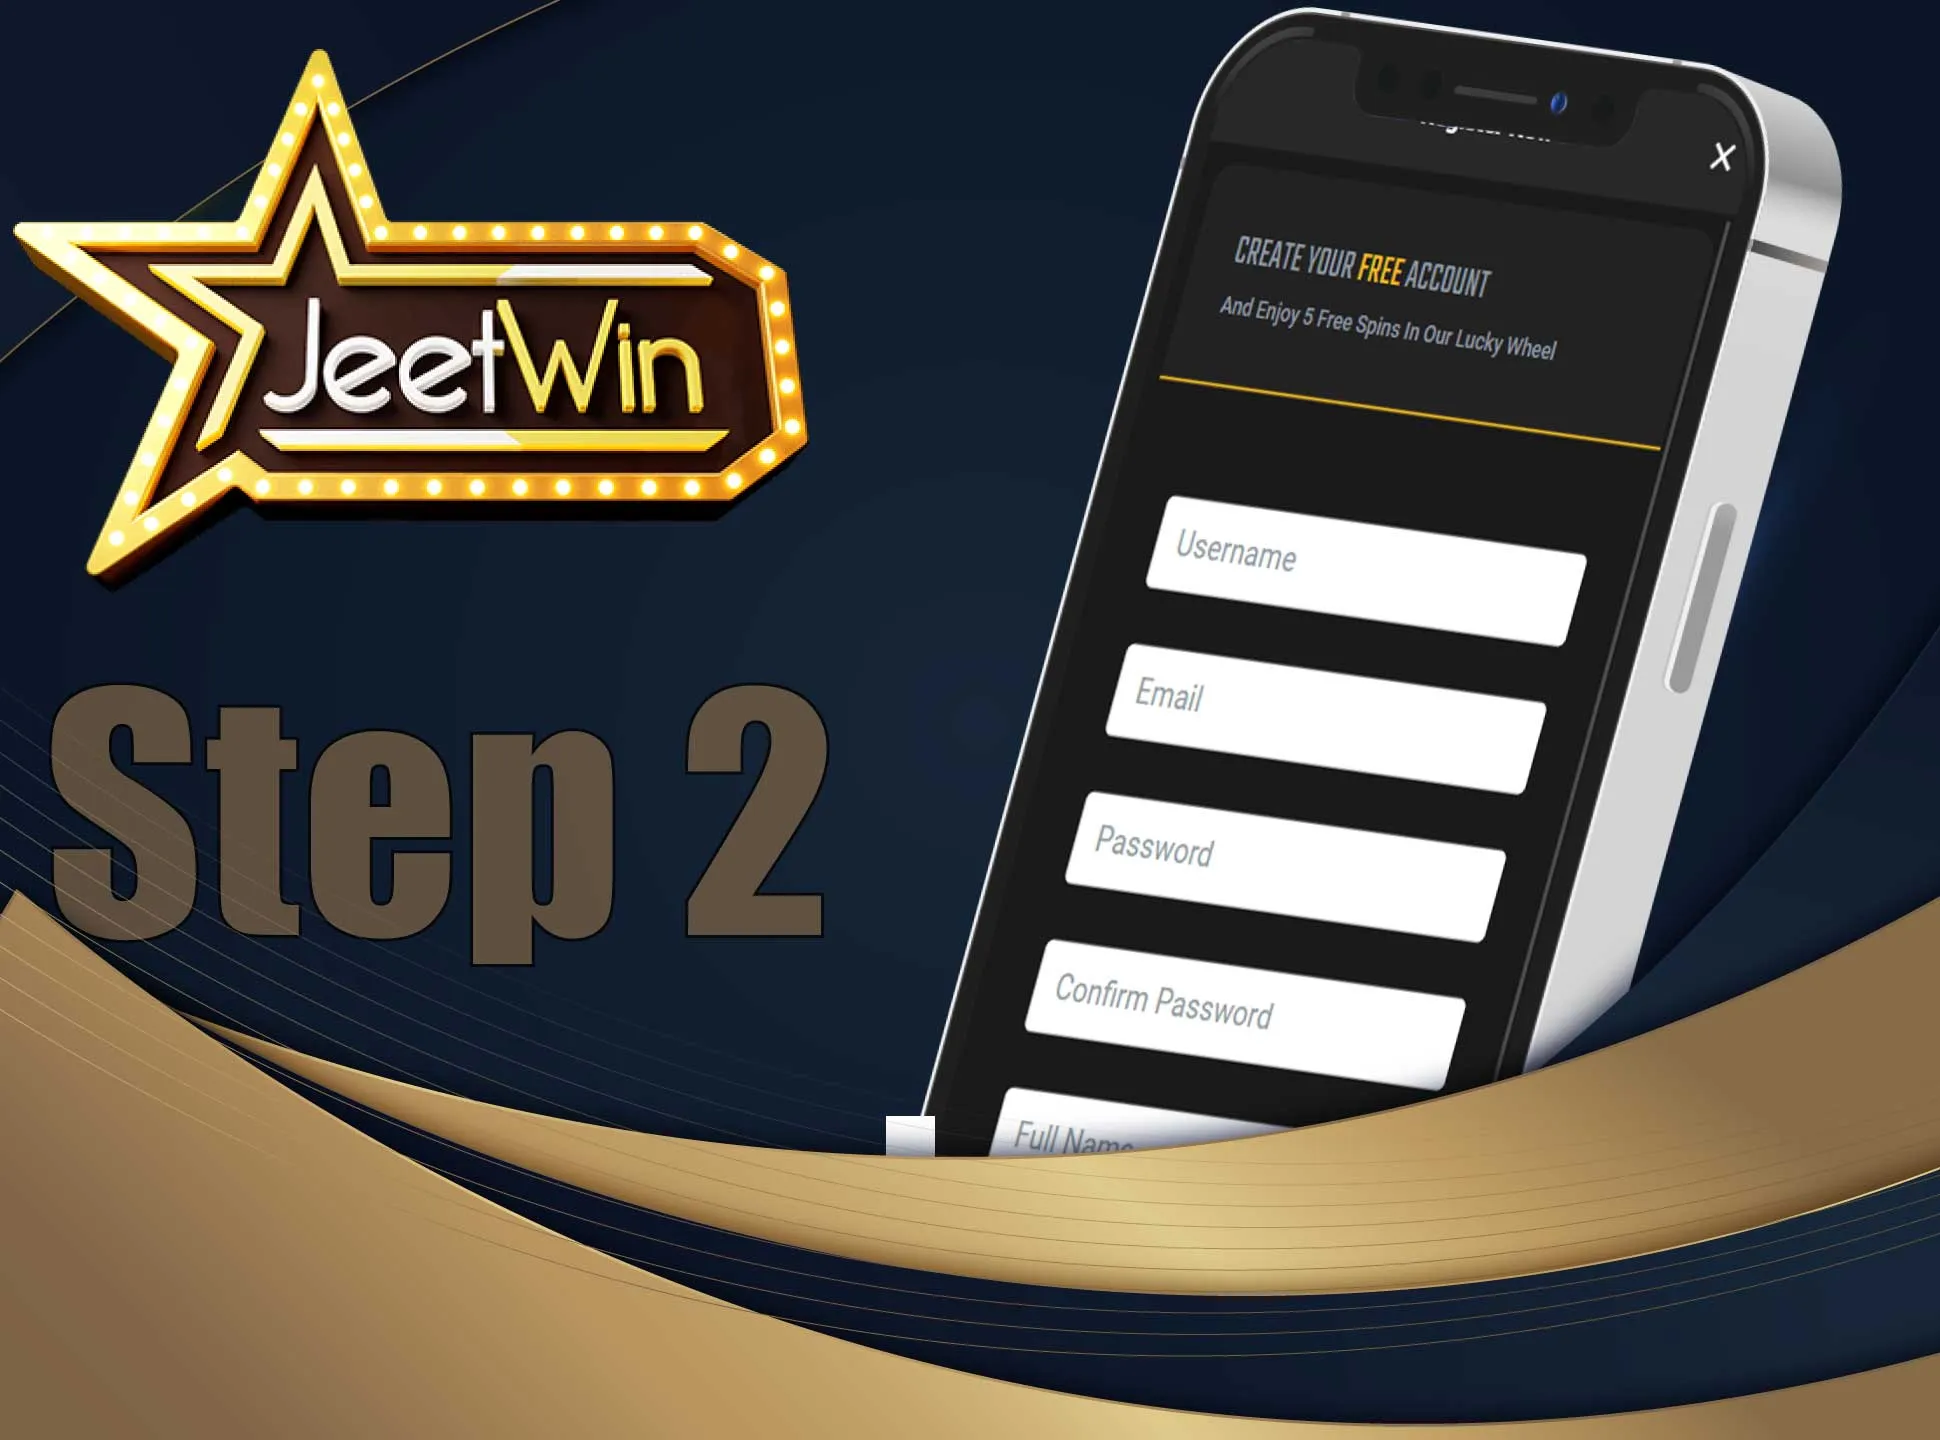 Register your Jeetwin account.